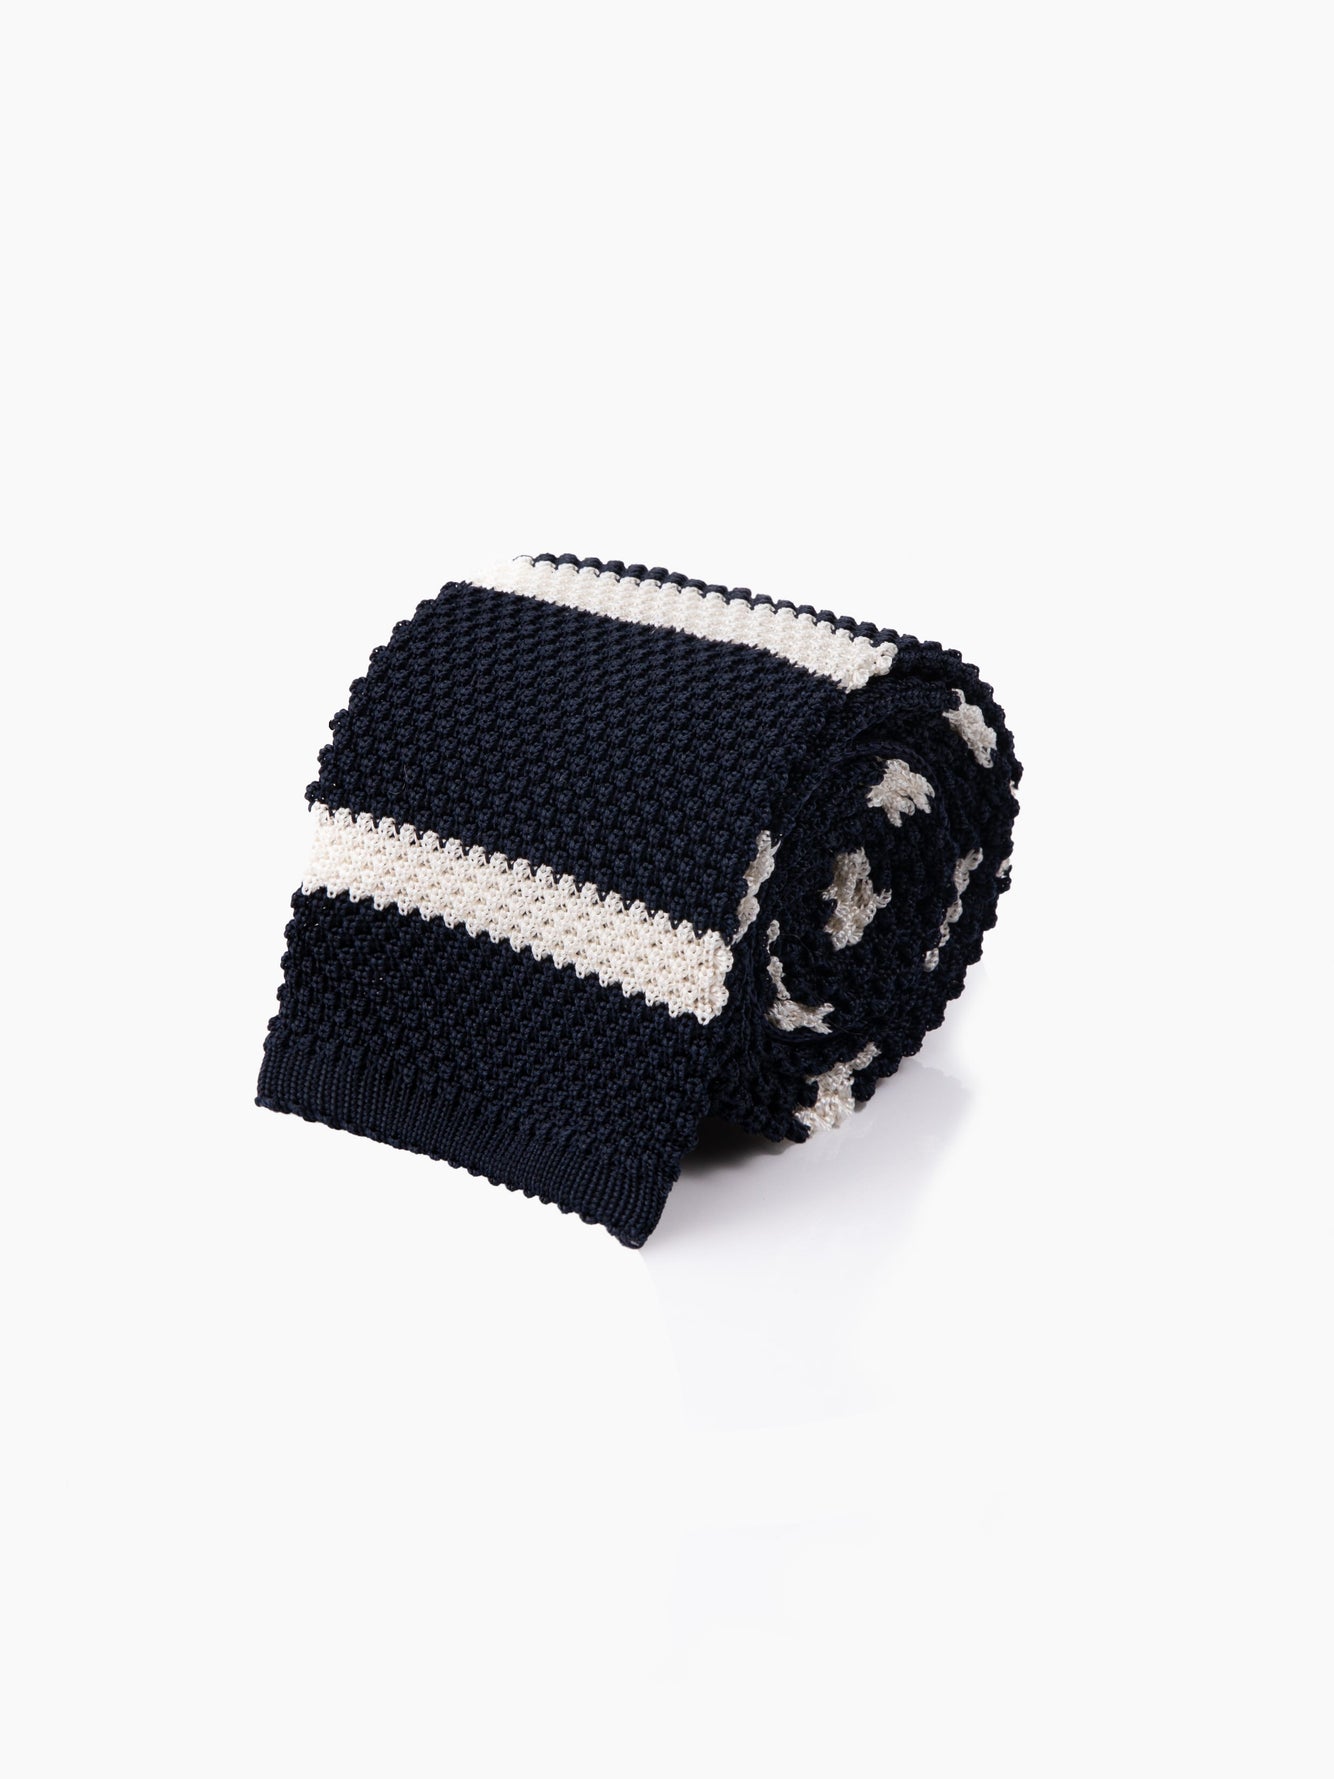 White Navy Striped Knitted Tie - Grand Le Mar